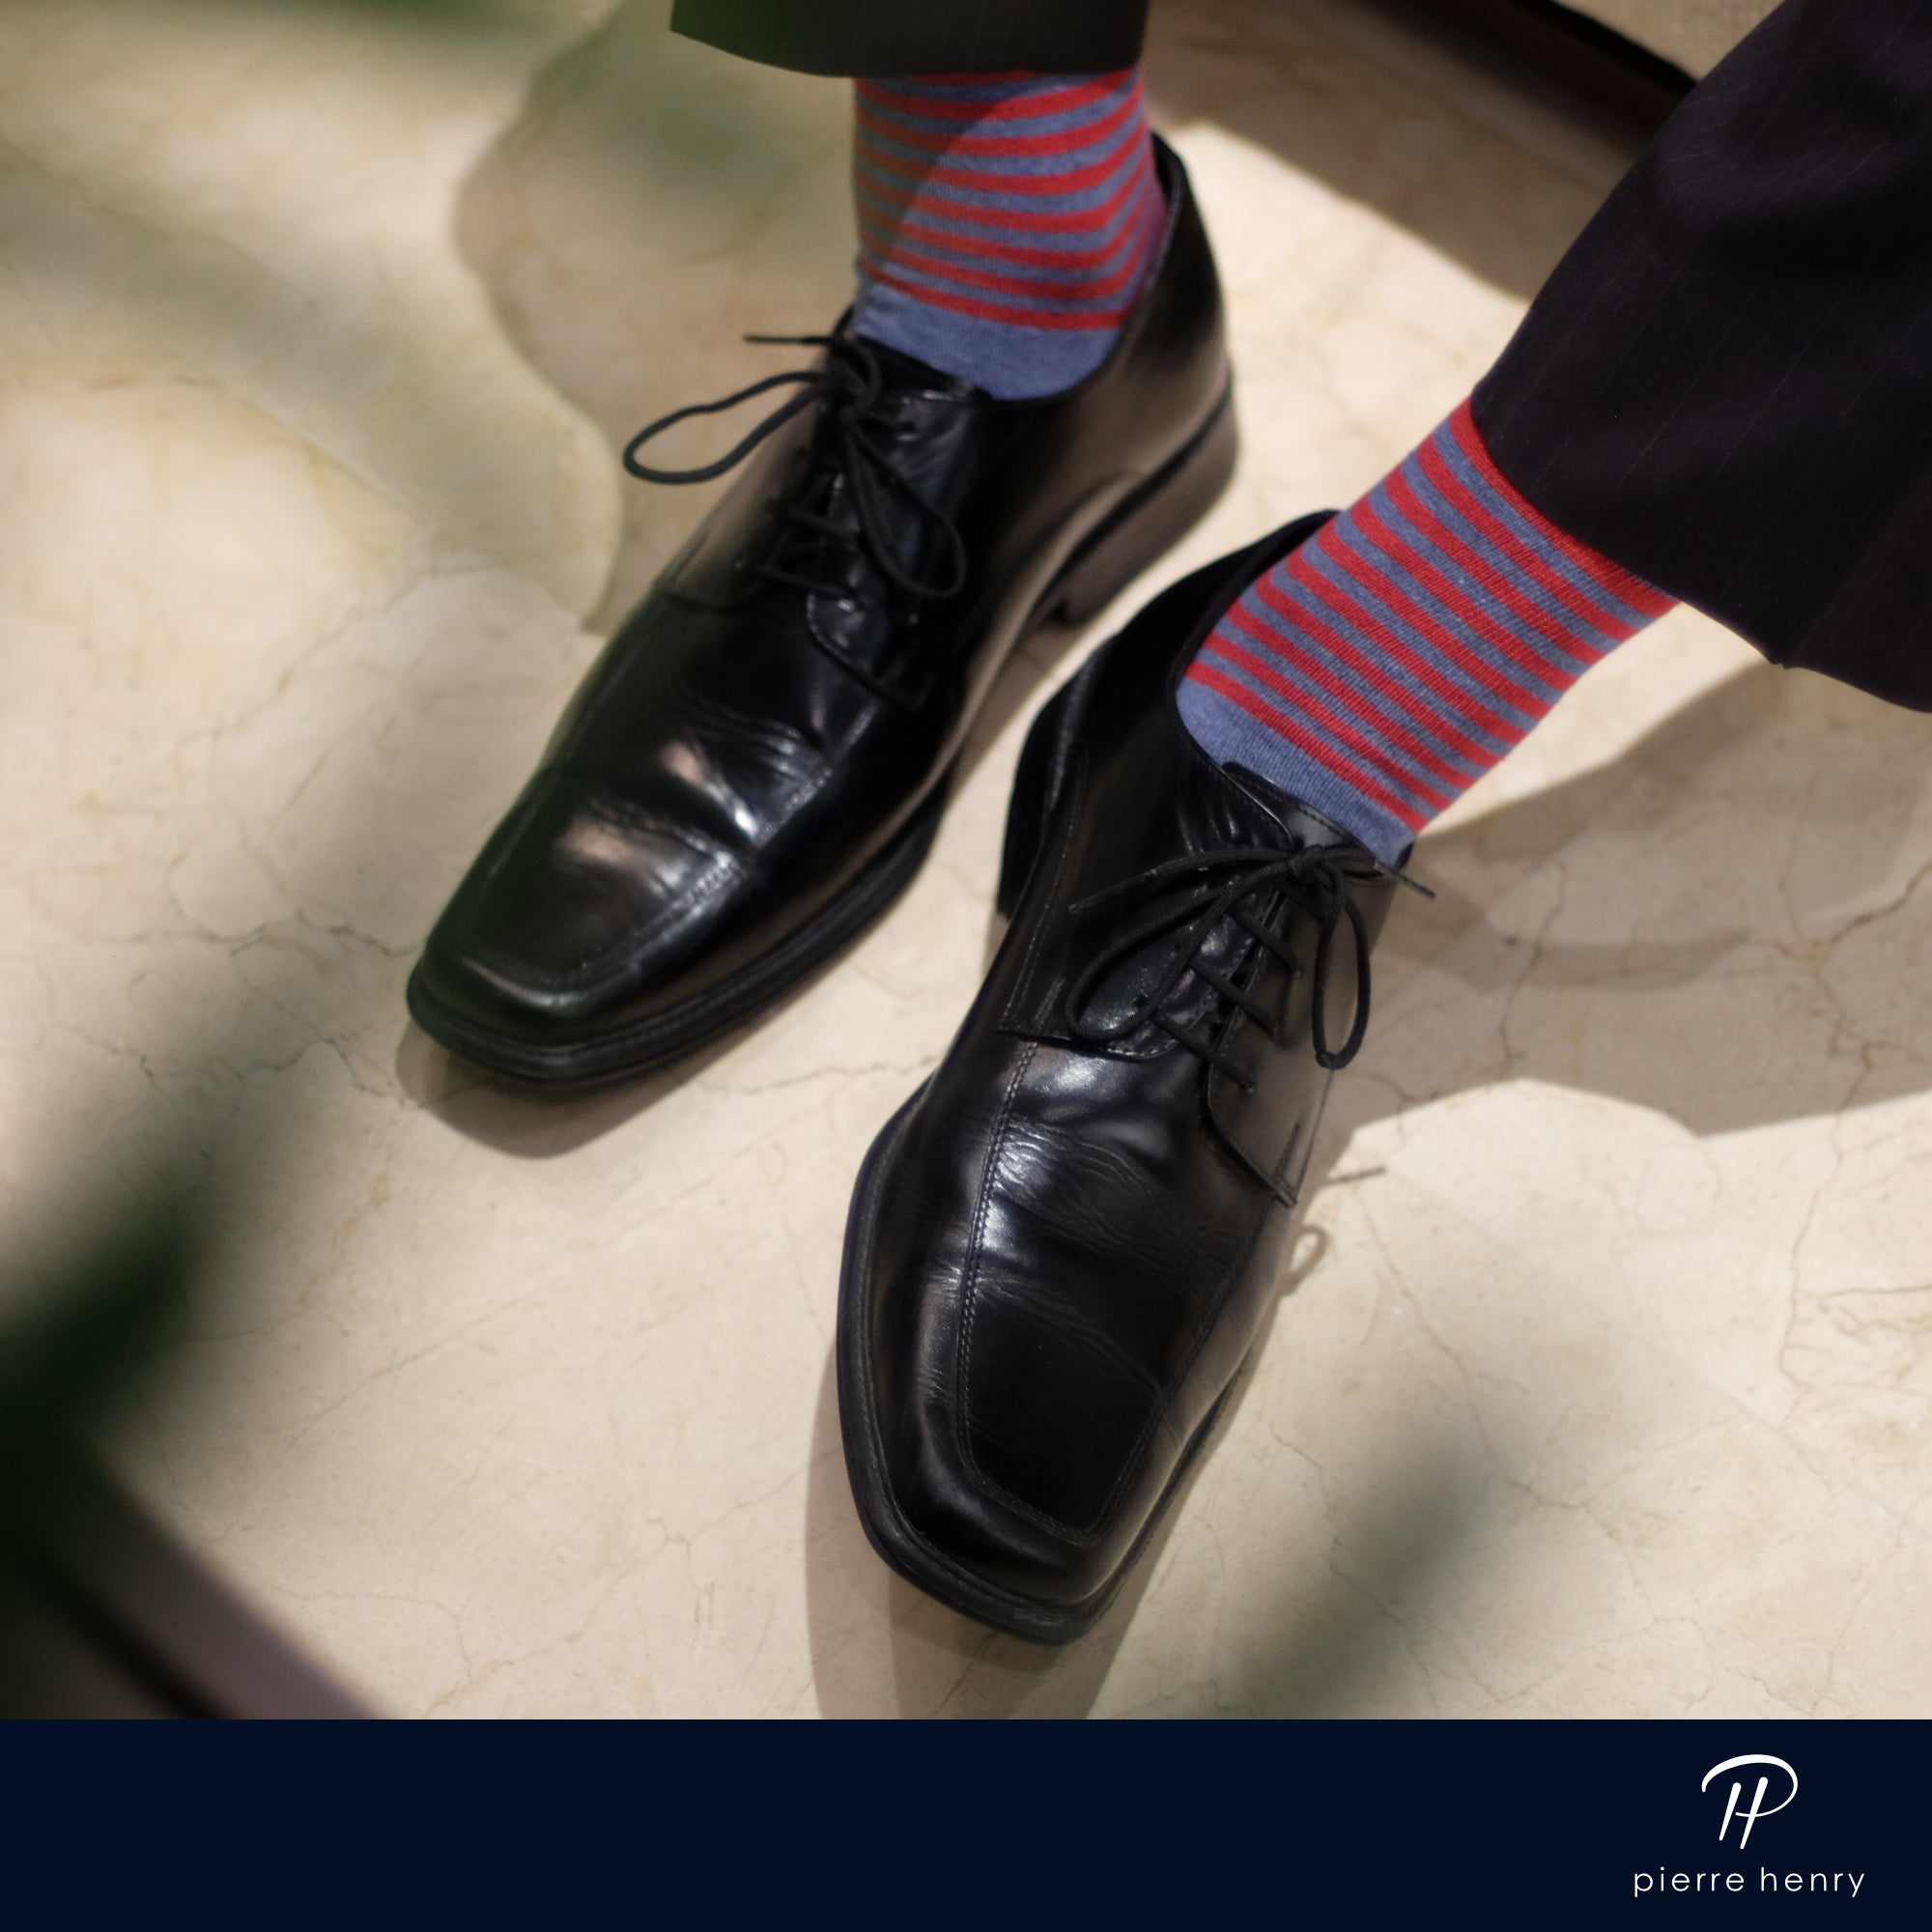 grey and red striped over the calf dress socks, black dress shoes, black dress pants